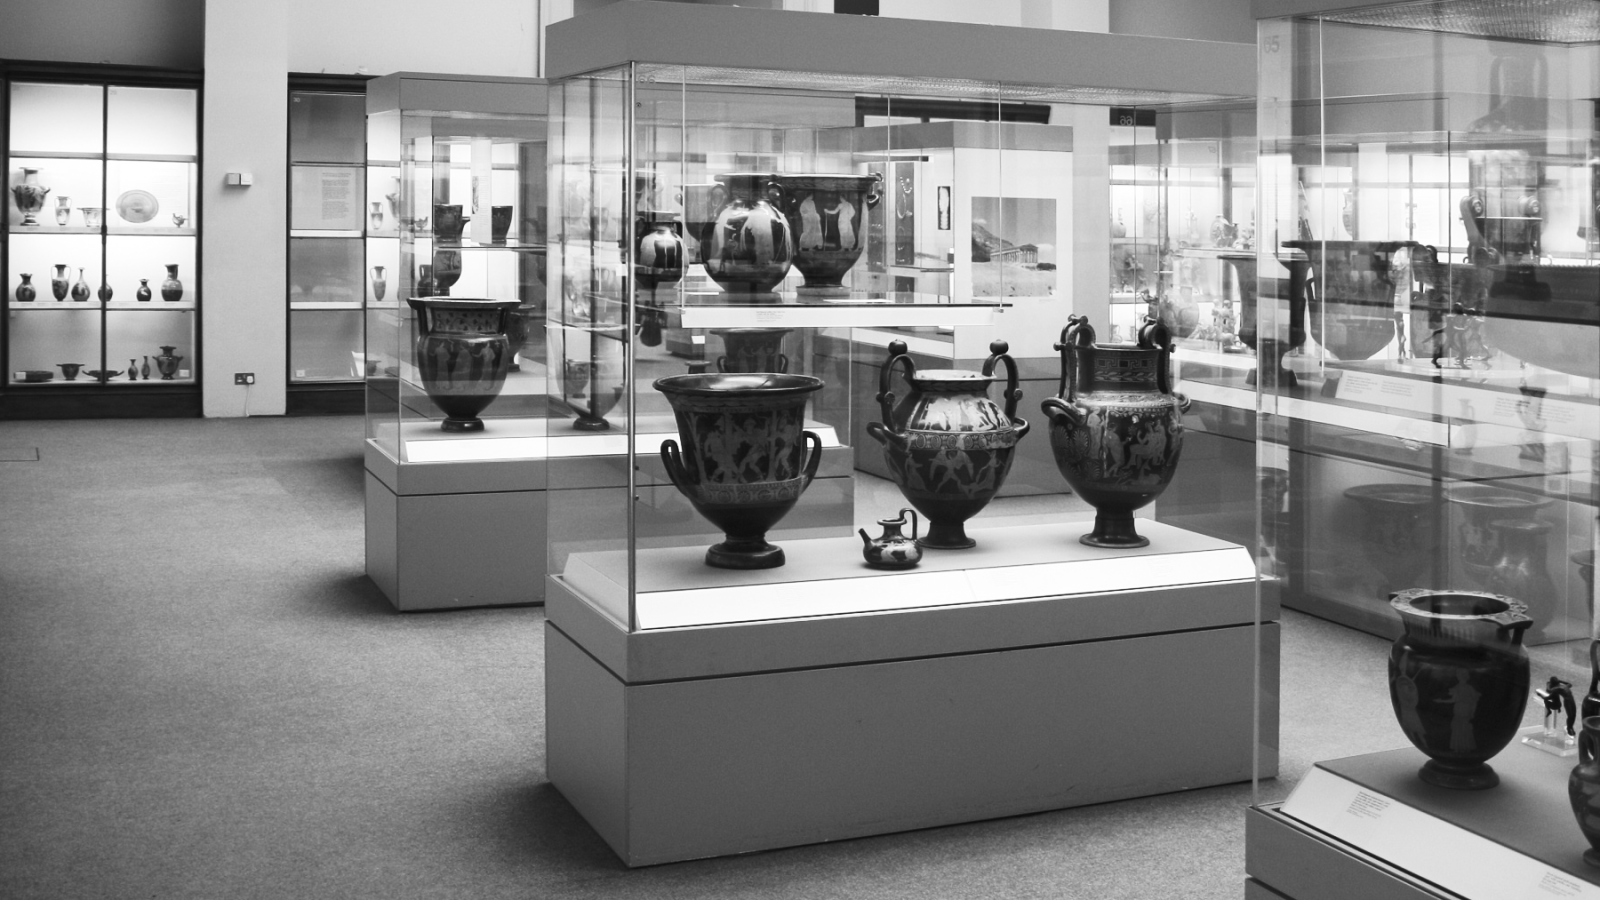 Stop Thief! Why the British Museum Failed To Protect Its Collection, and How Decolonization Can Help